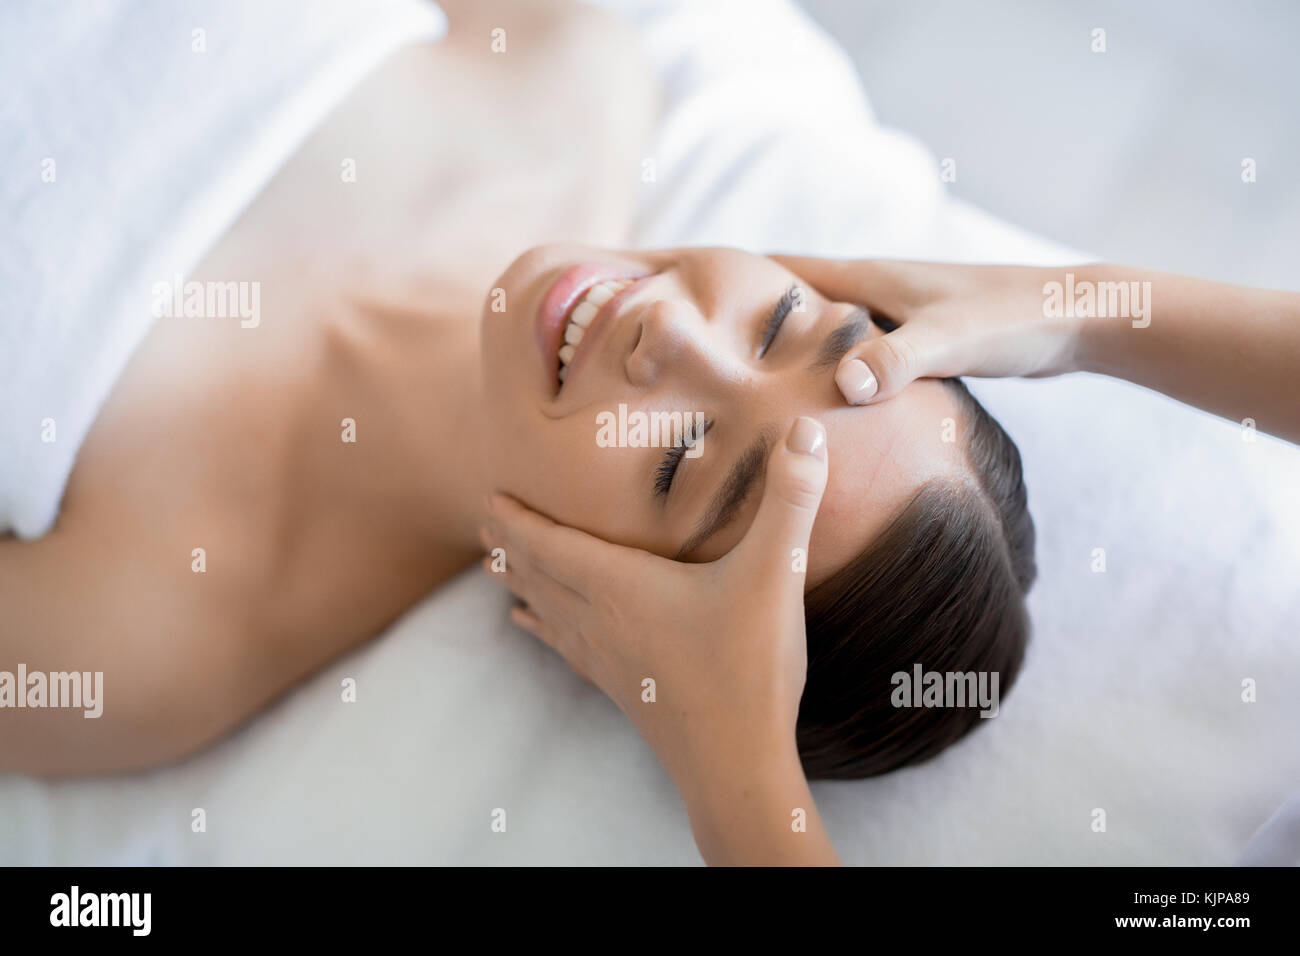 Masseuse keeping her hands on forehead of young client during massage of face Stock Photo